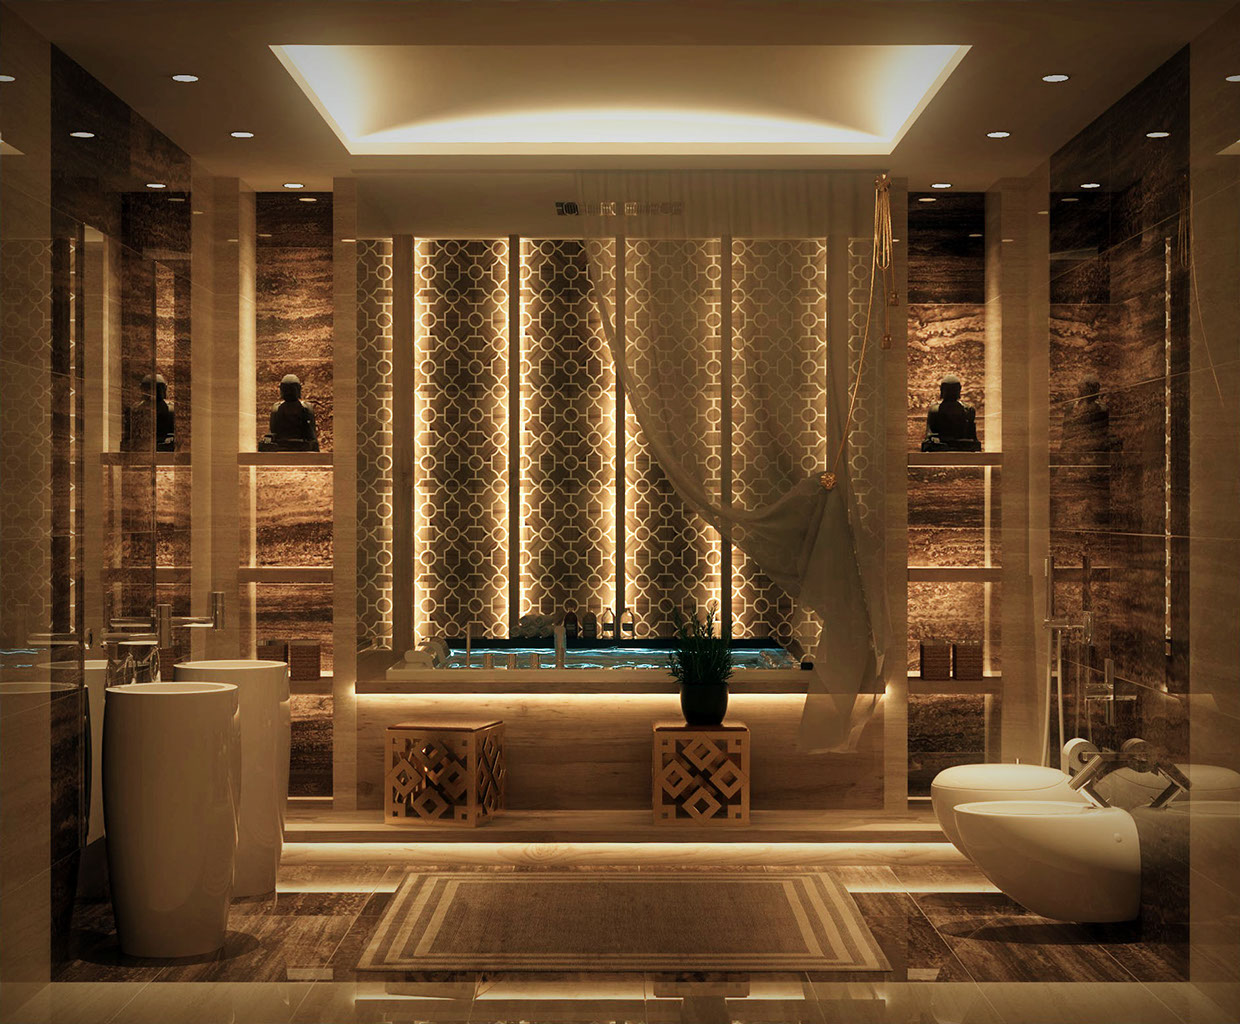 Bathroom-Design-With-Romantic-Lights-And-Alcove-Bathtub-And-Curtain-Decoration-Also-Freestanding-Bathtub-And-Flush-Toilet-And-Sleek-Brown-Textured-Wall-Tile-And-Hidden-Ceiling-Lamps